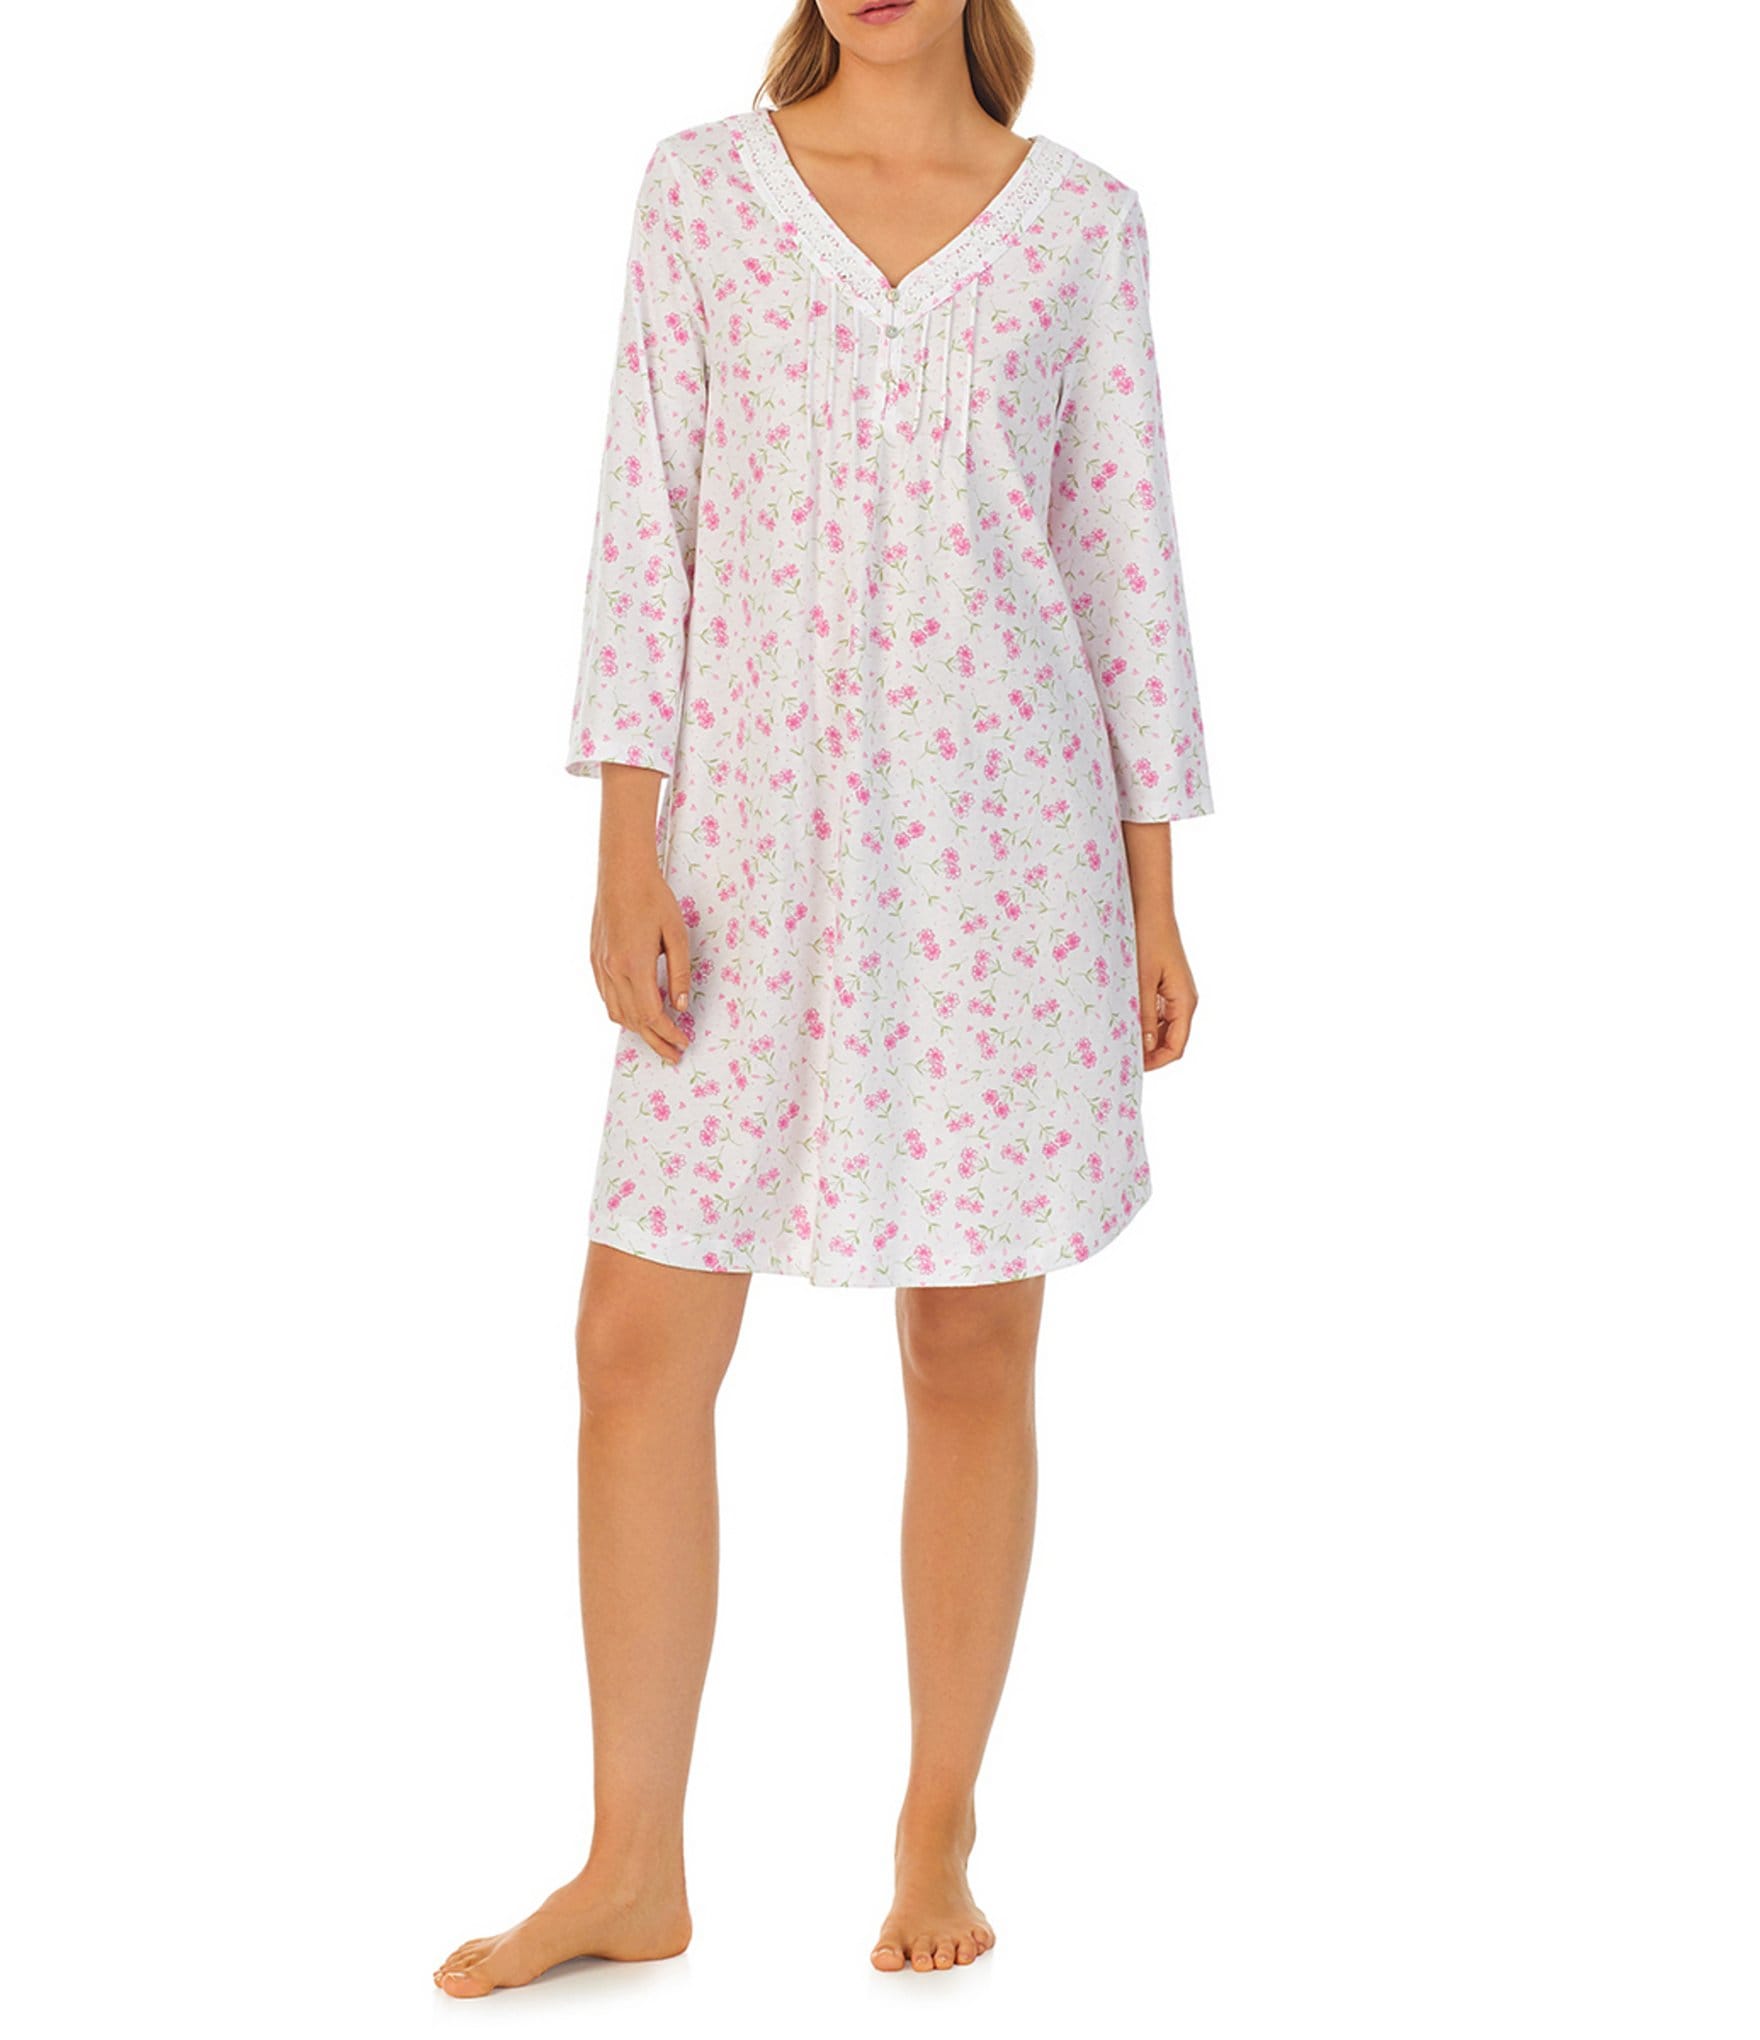 Carole Hochman Floral Cotton Jersey 3/4 Sleeve V-Neck Nightgown